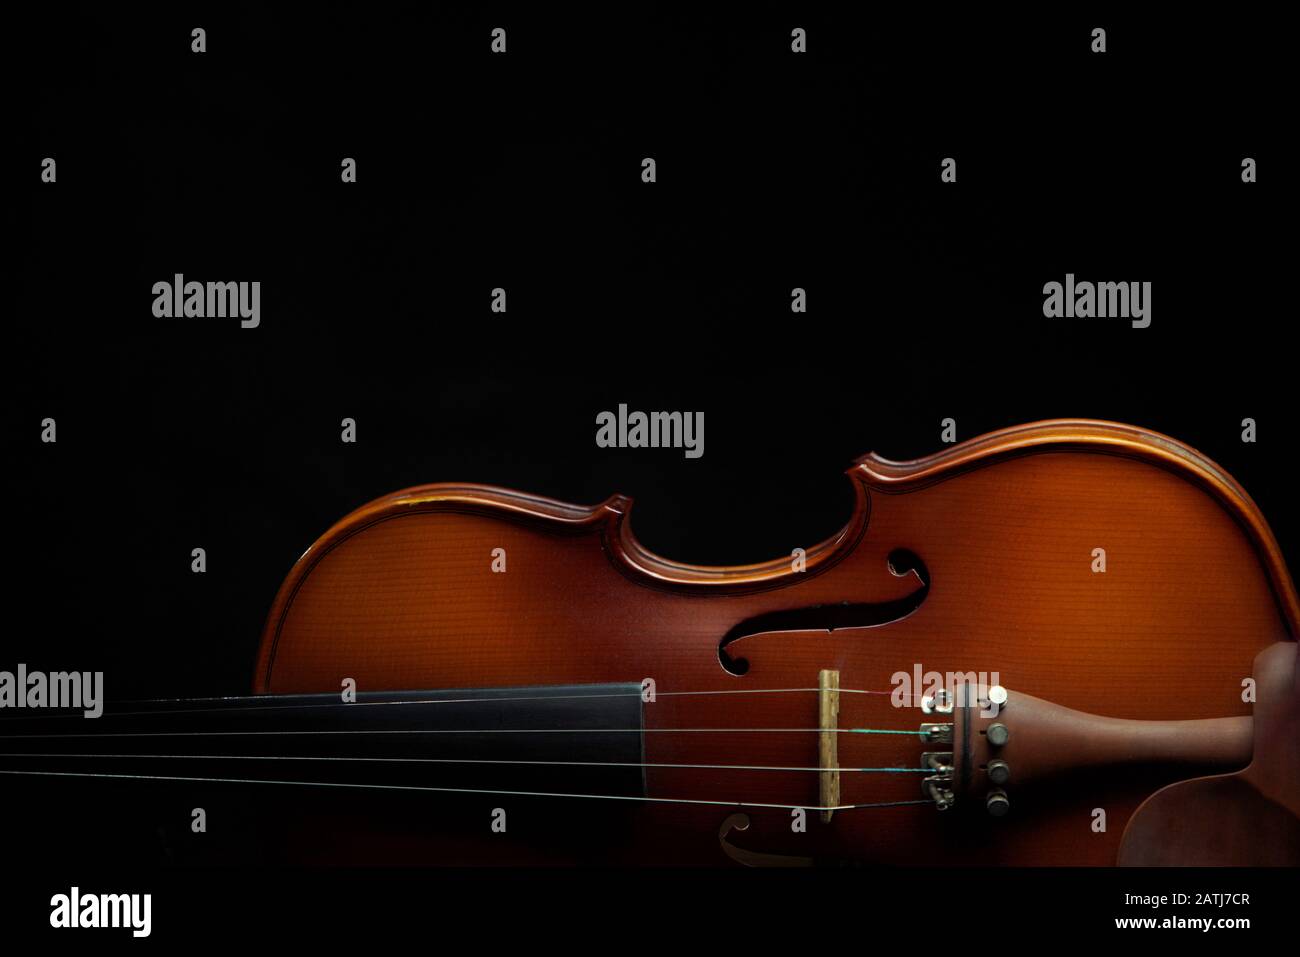 Violin copy space composition on black isolated background Stock Photo